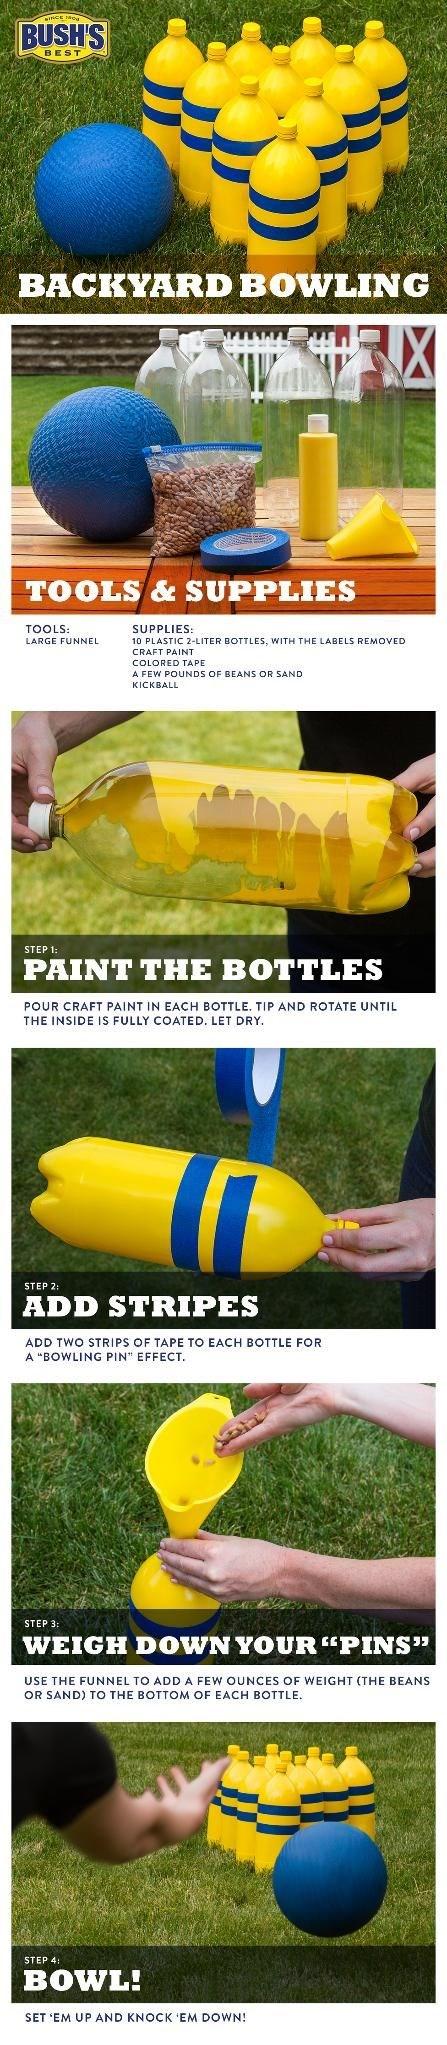 Bowling Supplies Needed: 10 plastic 2-liter bottles, with labels removed Craft Paint Colored Tape A few pounds of beans or sand Kickball Paint and decorate the bottle with the tape, then use a funnel